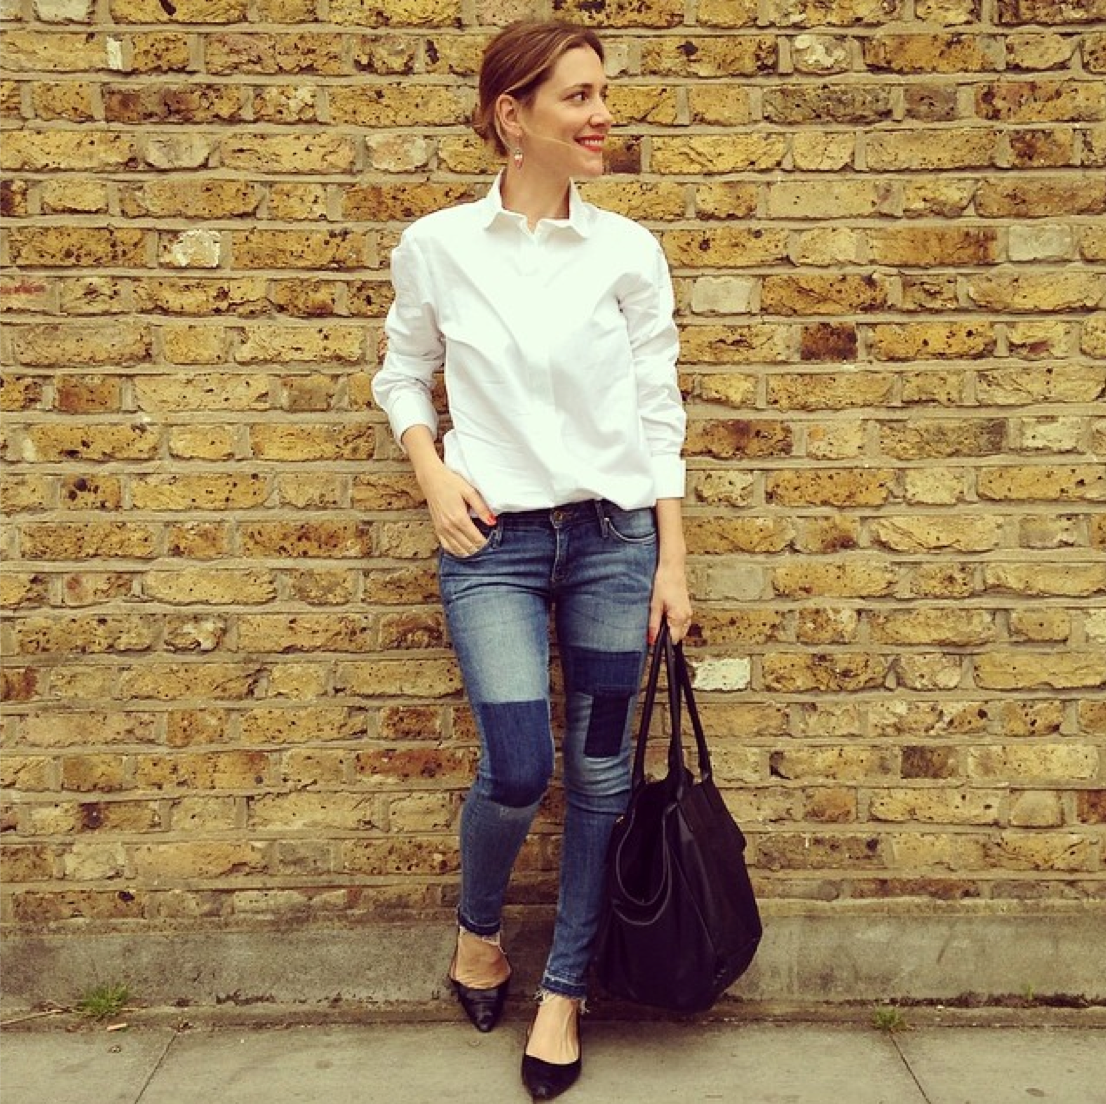 Wearing It Today: The crisp white shirt how-to